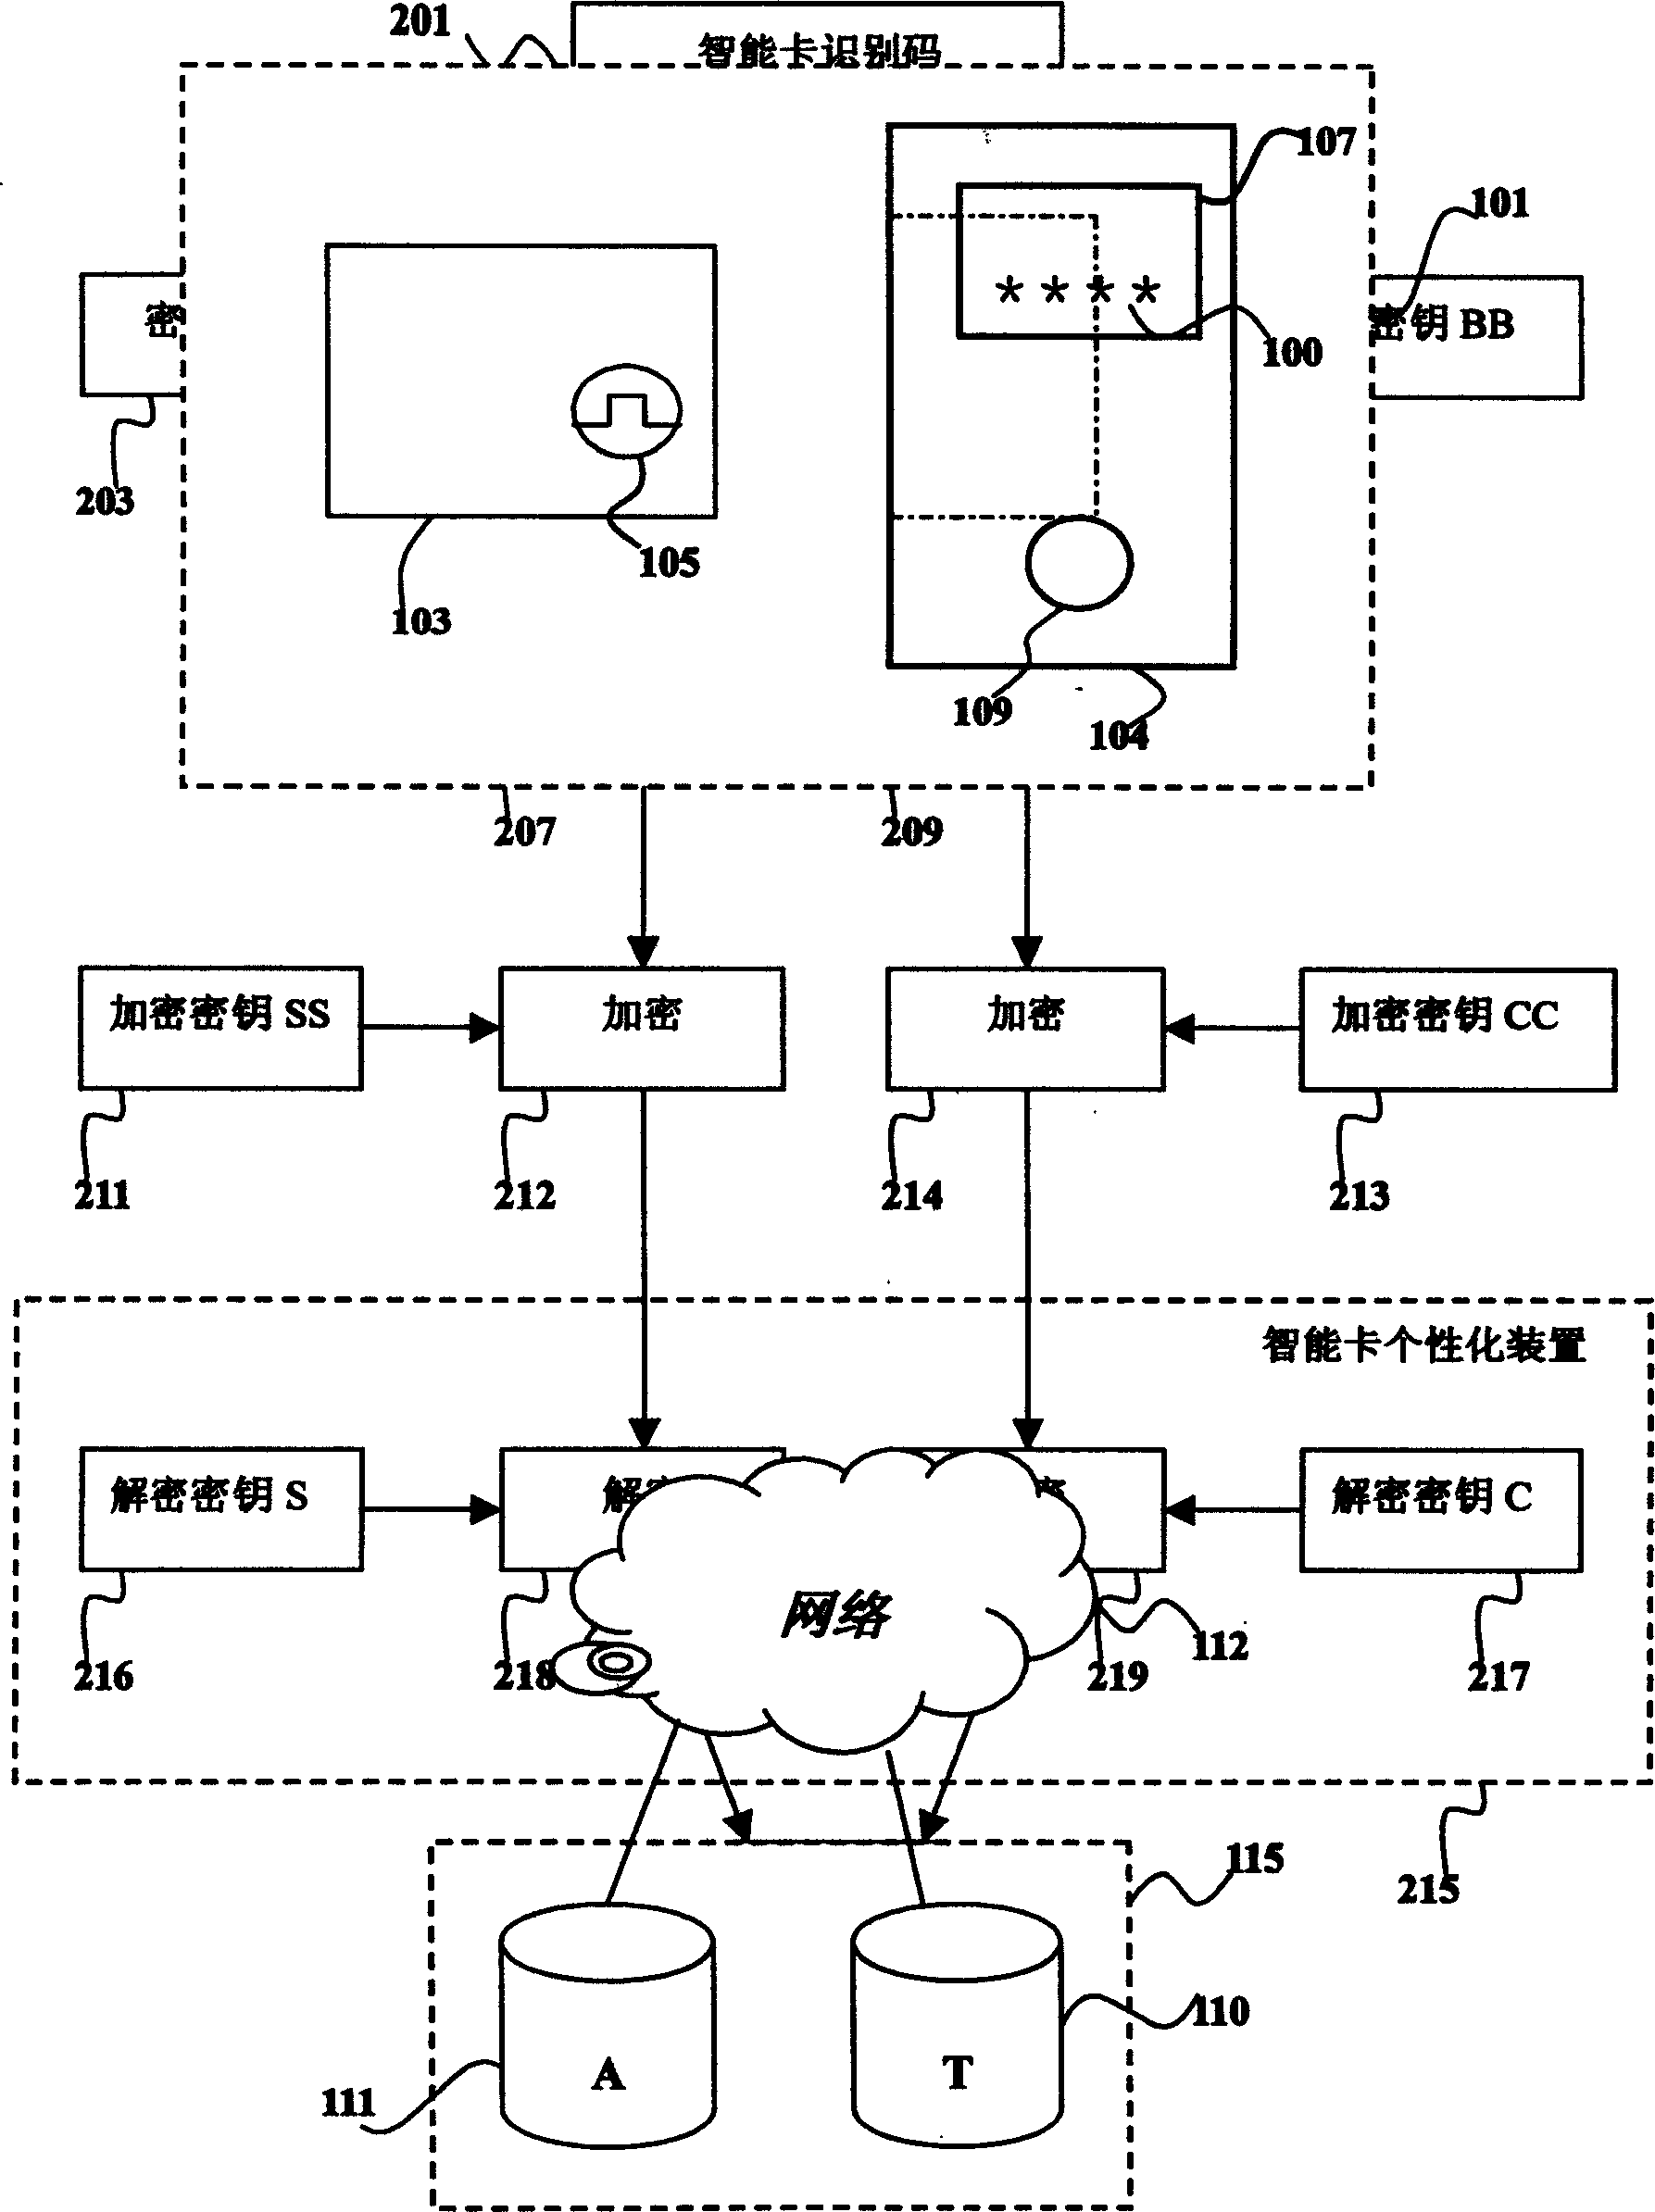 Identity certifying system based on intelligent card and dynamic coding